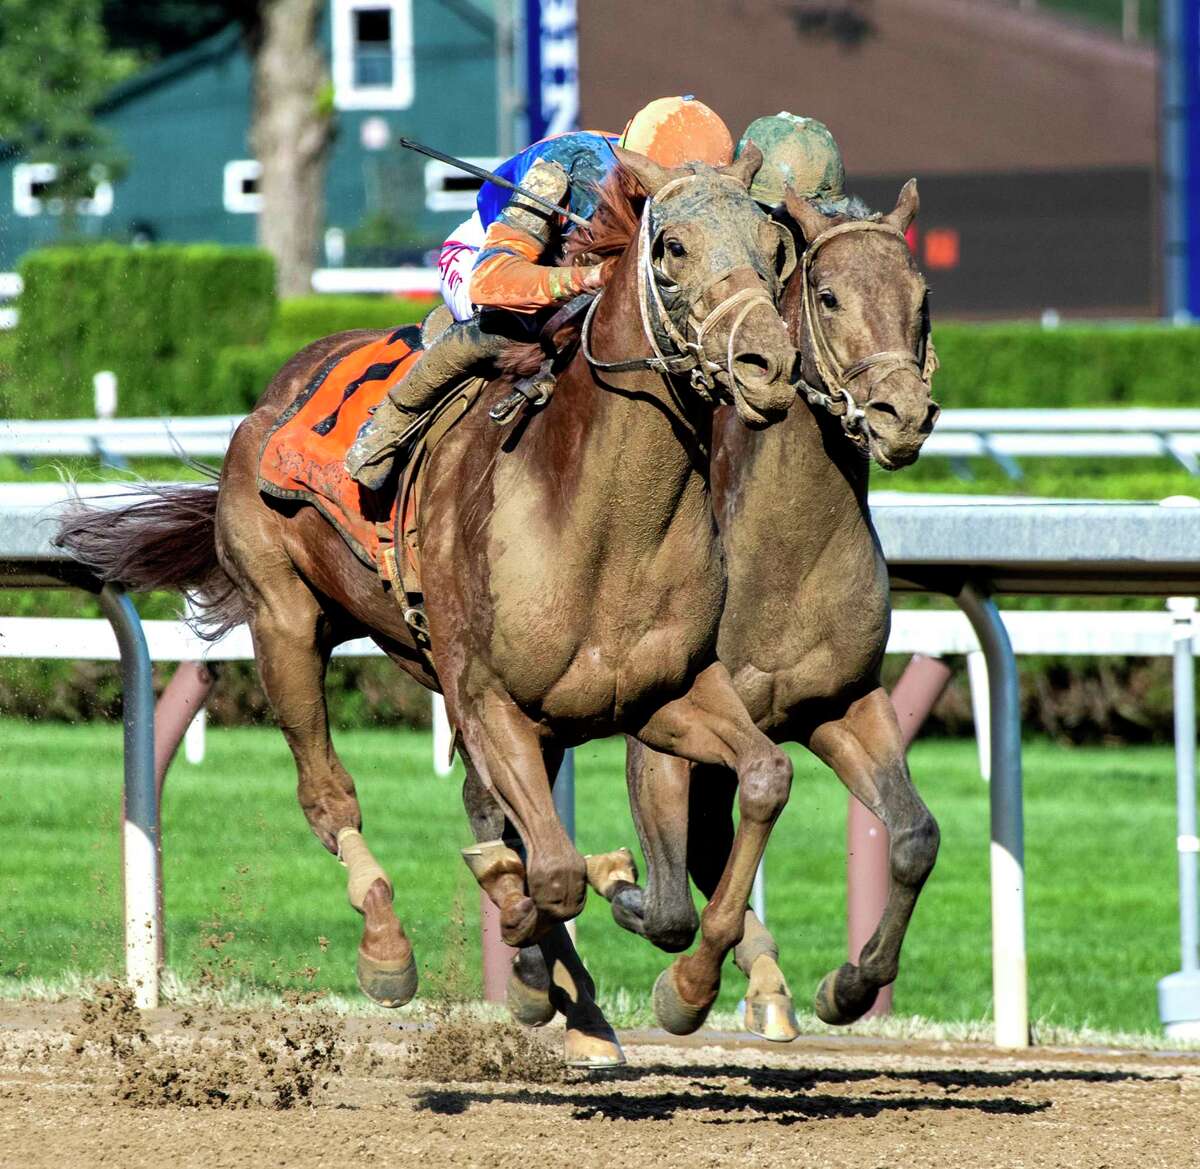 Irad Ortiz Jr. on Dynamic One holds off Miles D to win the 12th running of the The Curlin at The Saratoga Race Course Friday July 30, 2021 in Saratoga Springs, N.Y. Photo special to the Times Union by Skip Dickstein